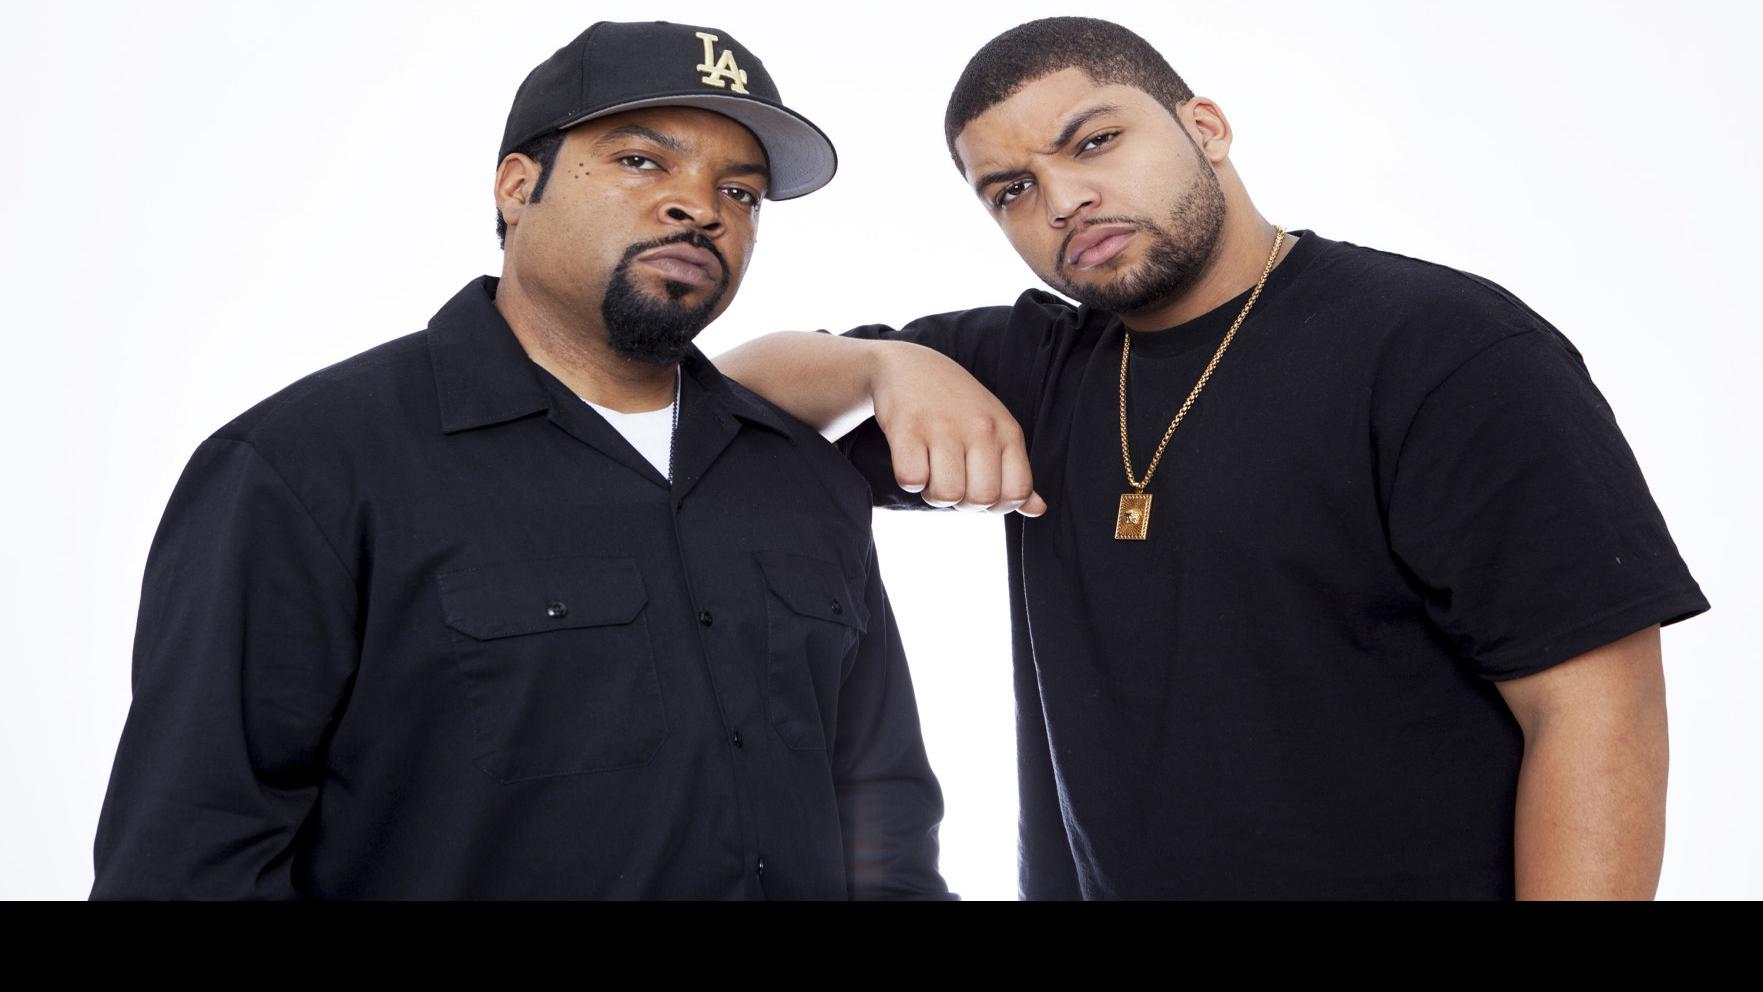 Ice Cube  Ice cube rapper, Ice cube nwa, Good looking men